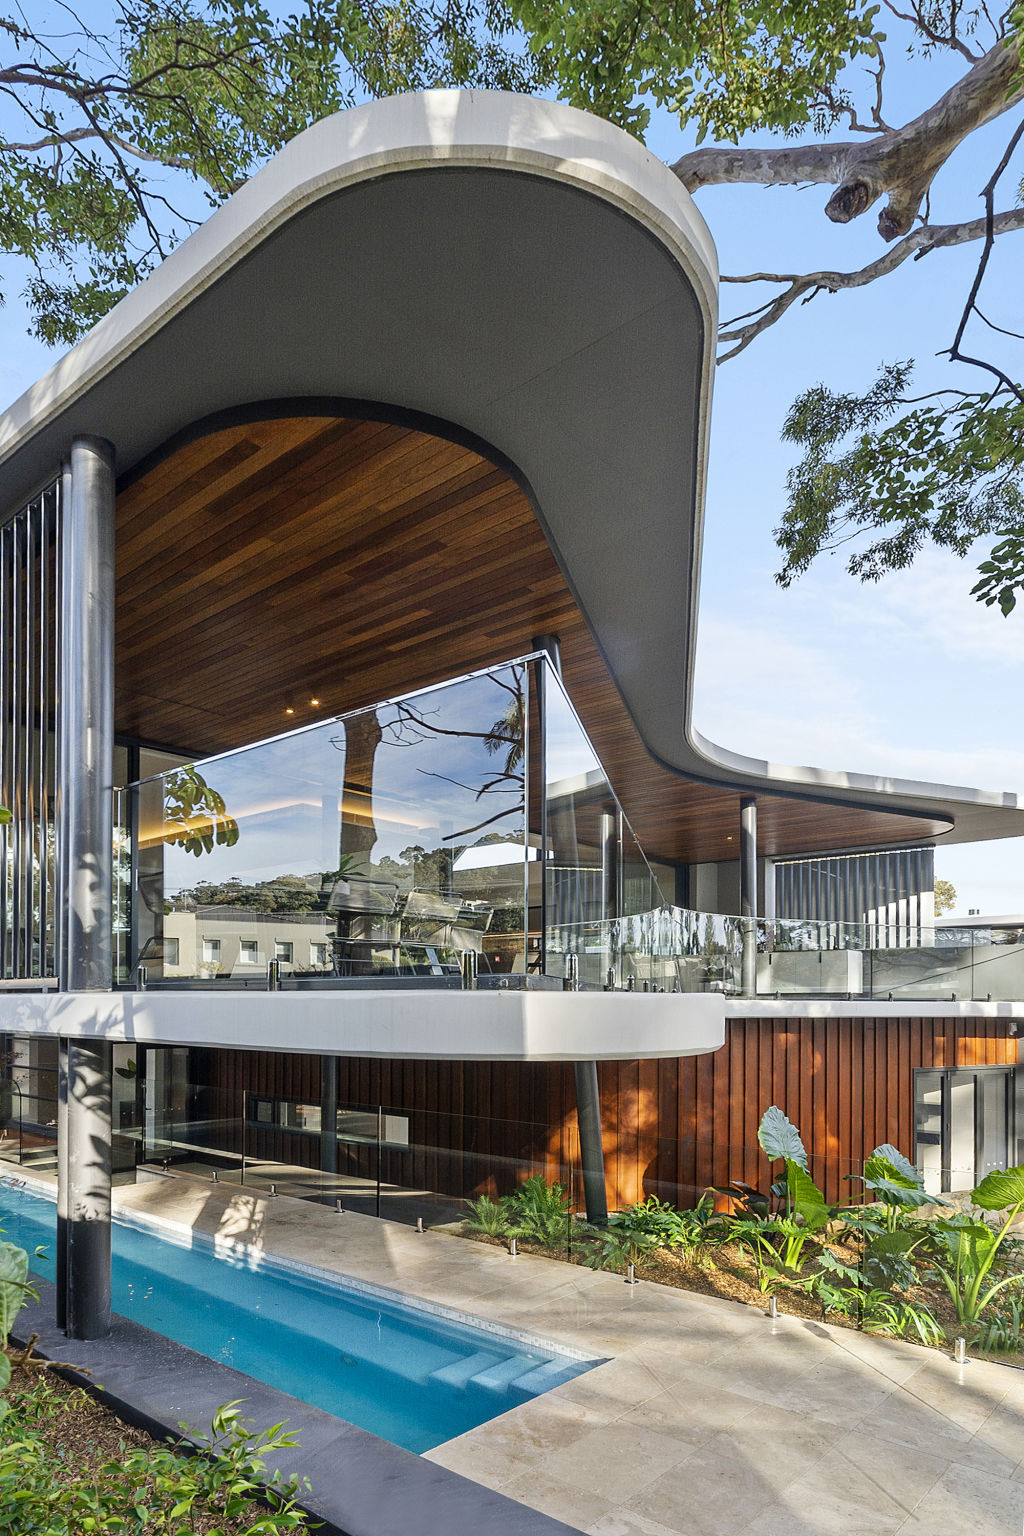 The roof and balcony are shaped in a way that reflects the root ball of a spotted gum. Photo: Supplied